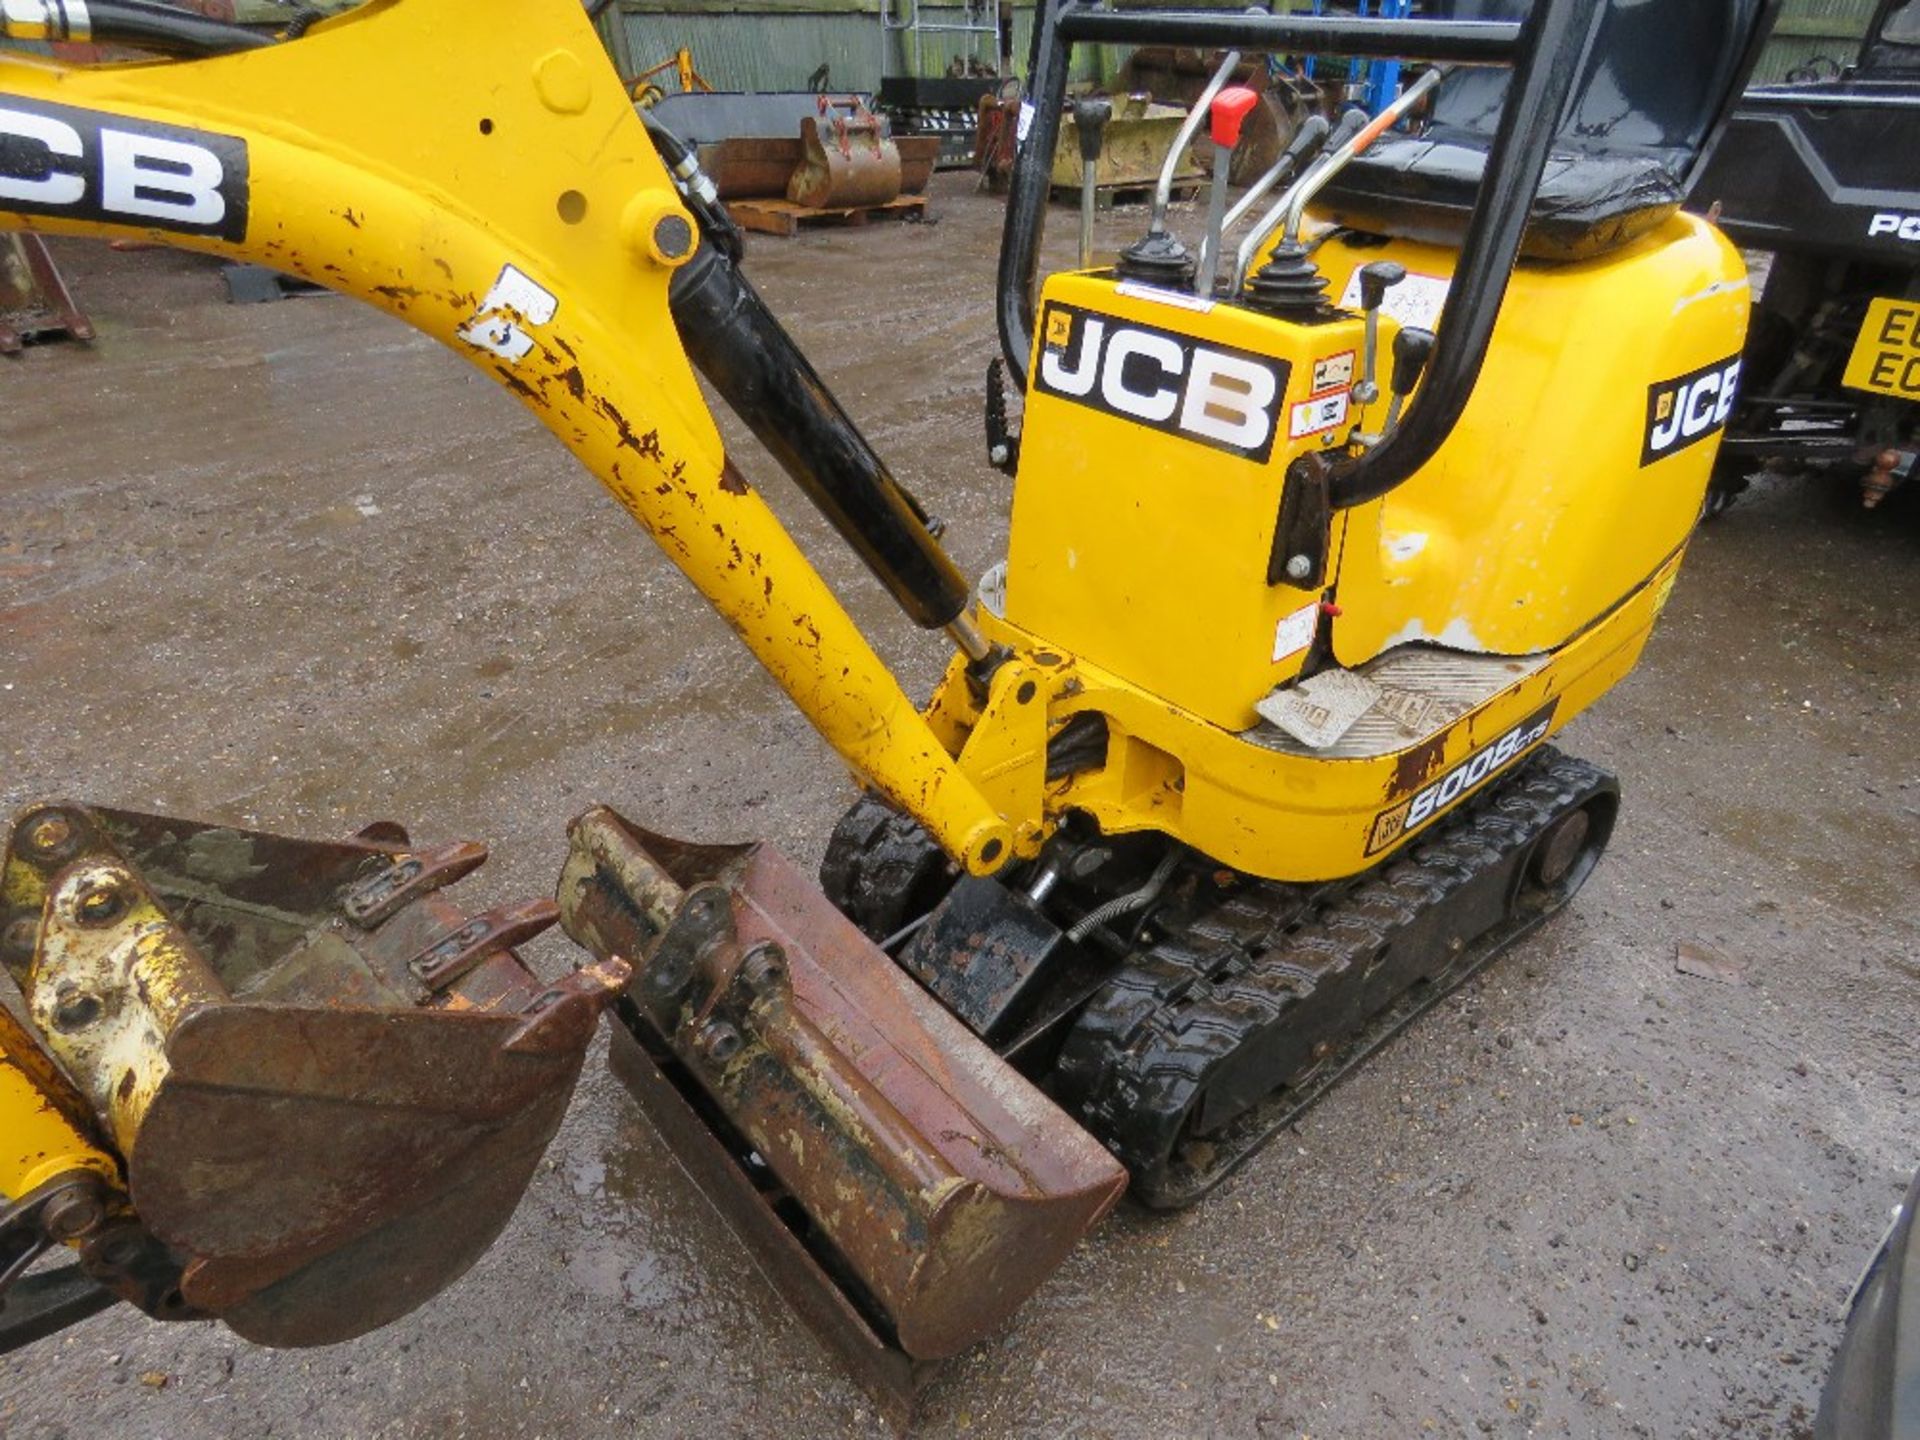 JCB 8008CTS MICRO EXCAVATOR YEAR 2019. 463 REC HOURS. 3 NO BUCKETS. needs some attention - Image 9 of 10